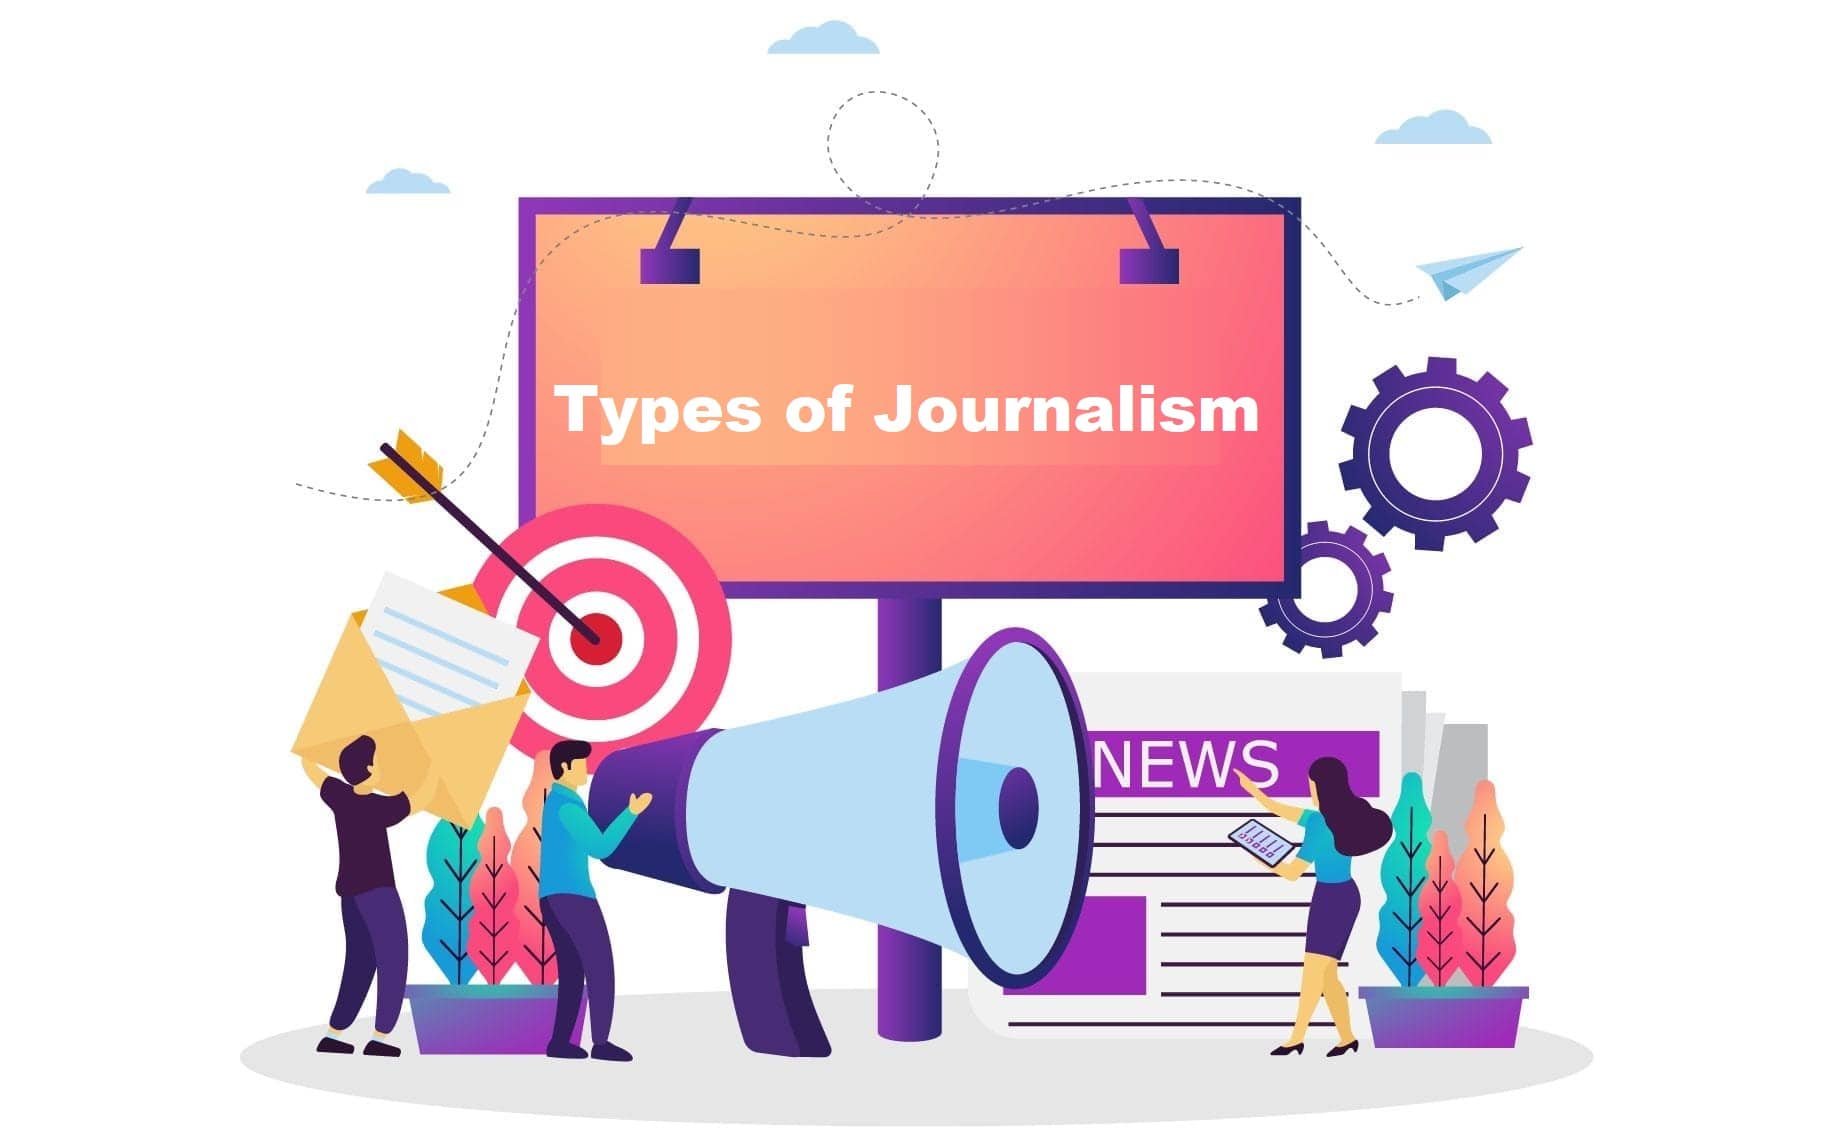 A Brief Introduction to the Types of Journalism!